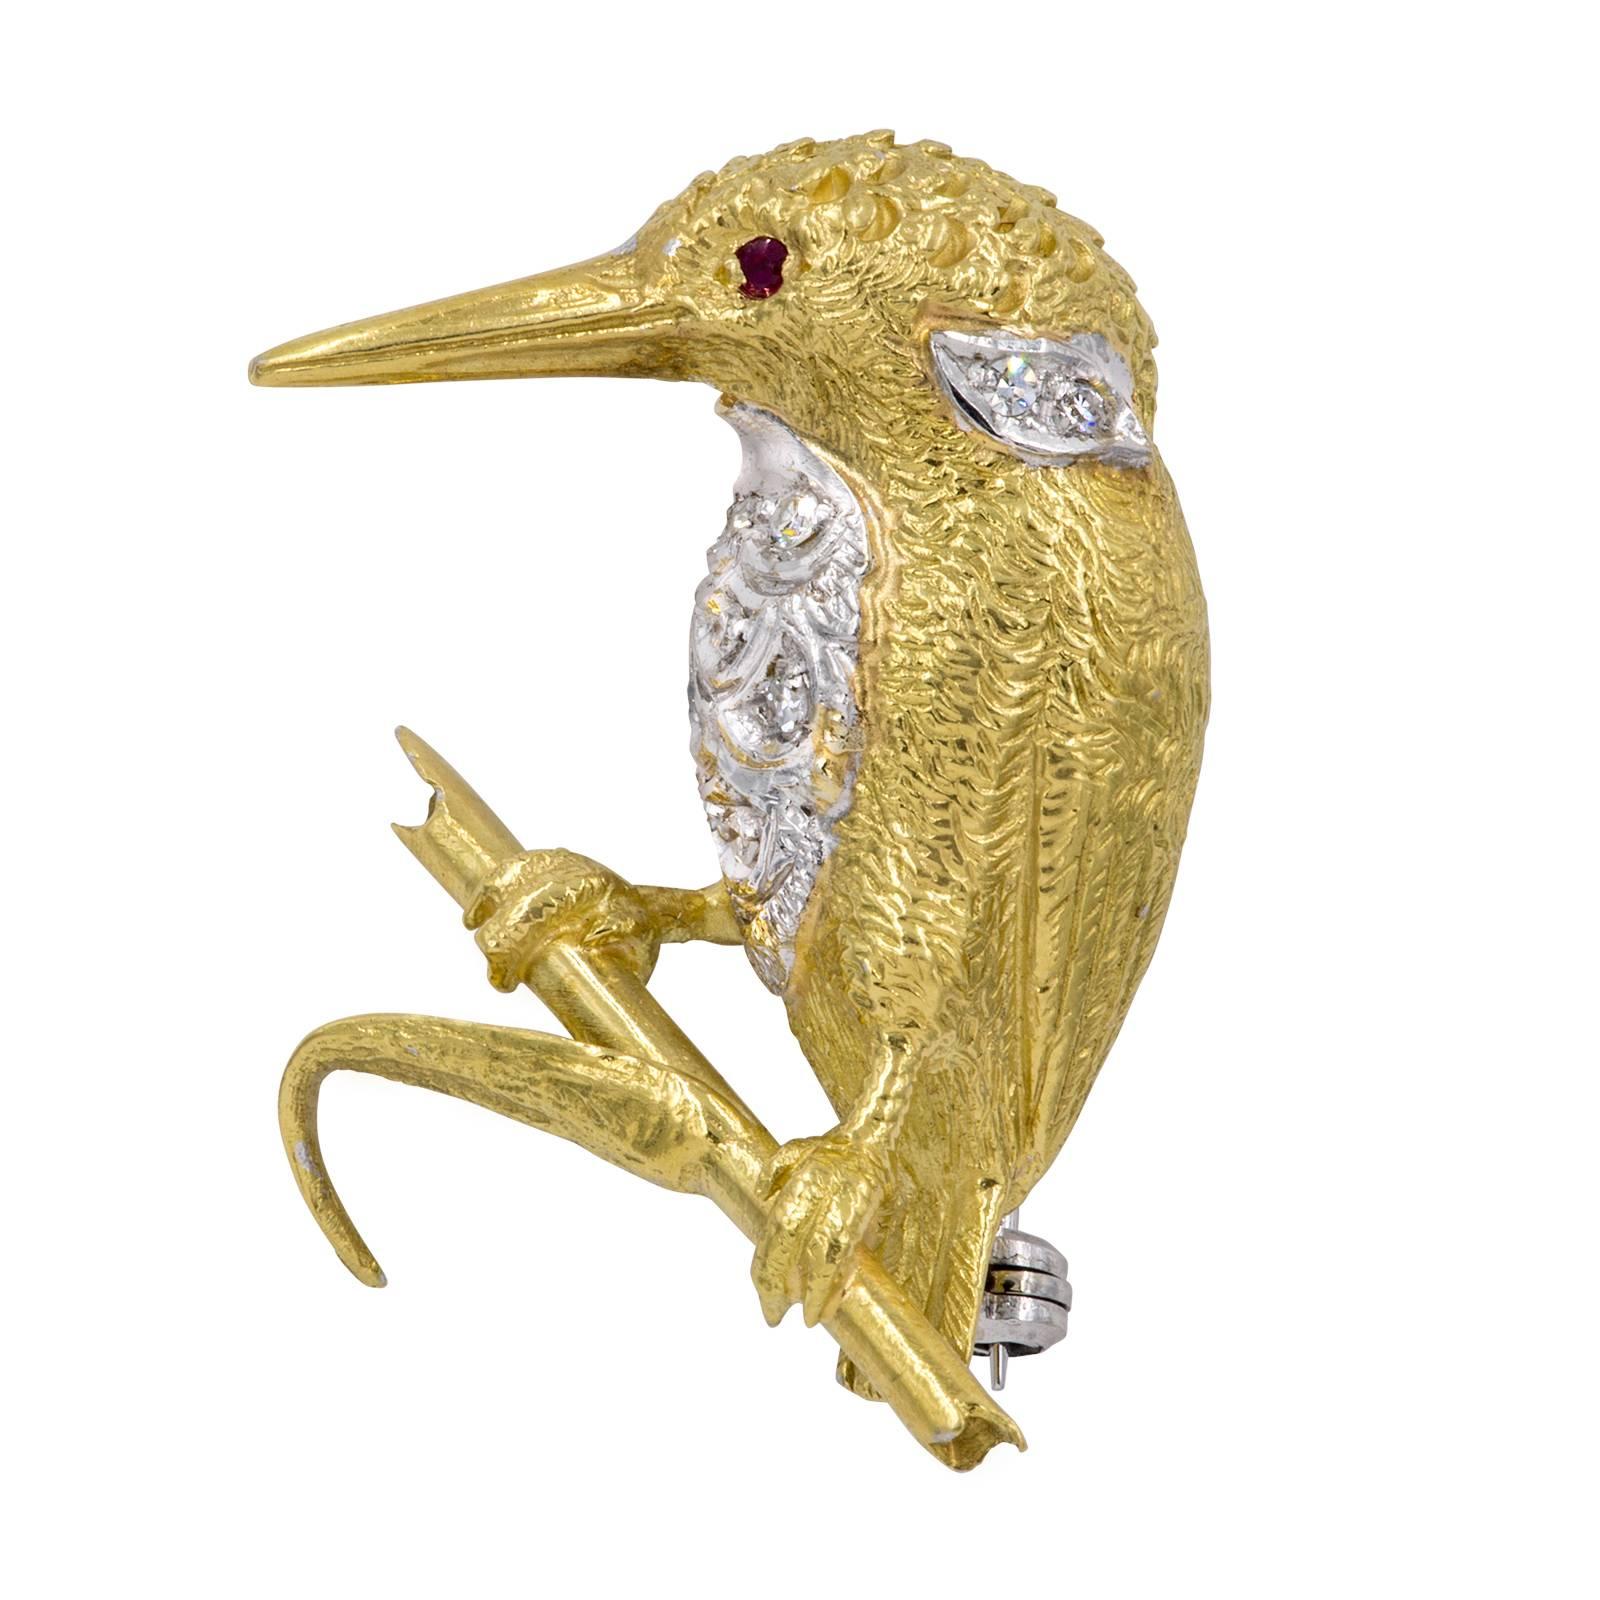 Charming Bird Brooch, Kingfisher sitting on a branch.  18k yellow gold with diamond breast.  Ruby eye and diamonds on its nape too.  Total of 8 diamonds. .15ct.  Total weight 10.82g.  1.25h X 1